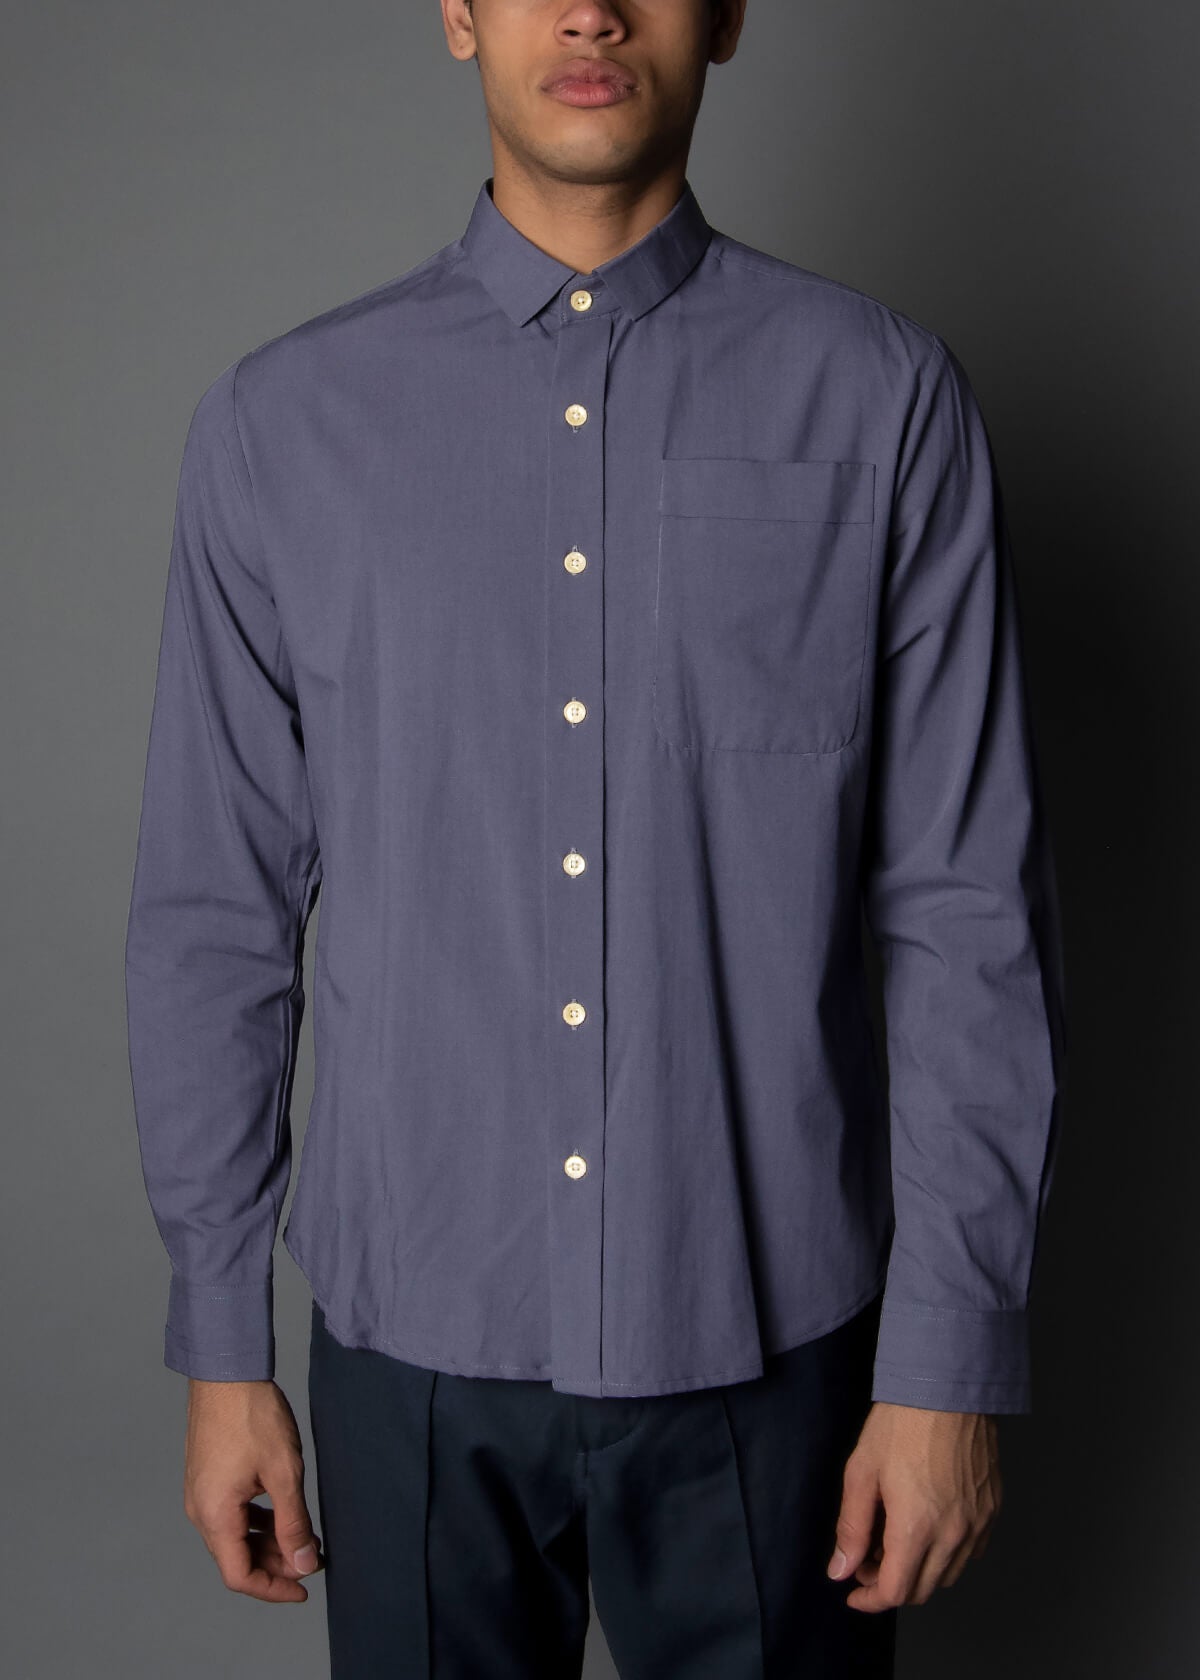 men's navy blue shirt made from cotton and modal